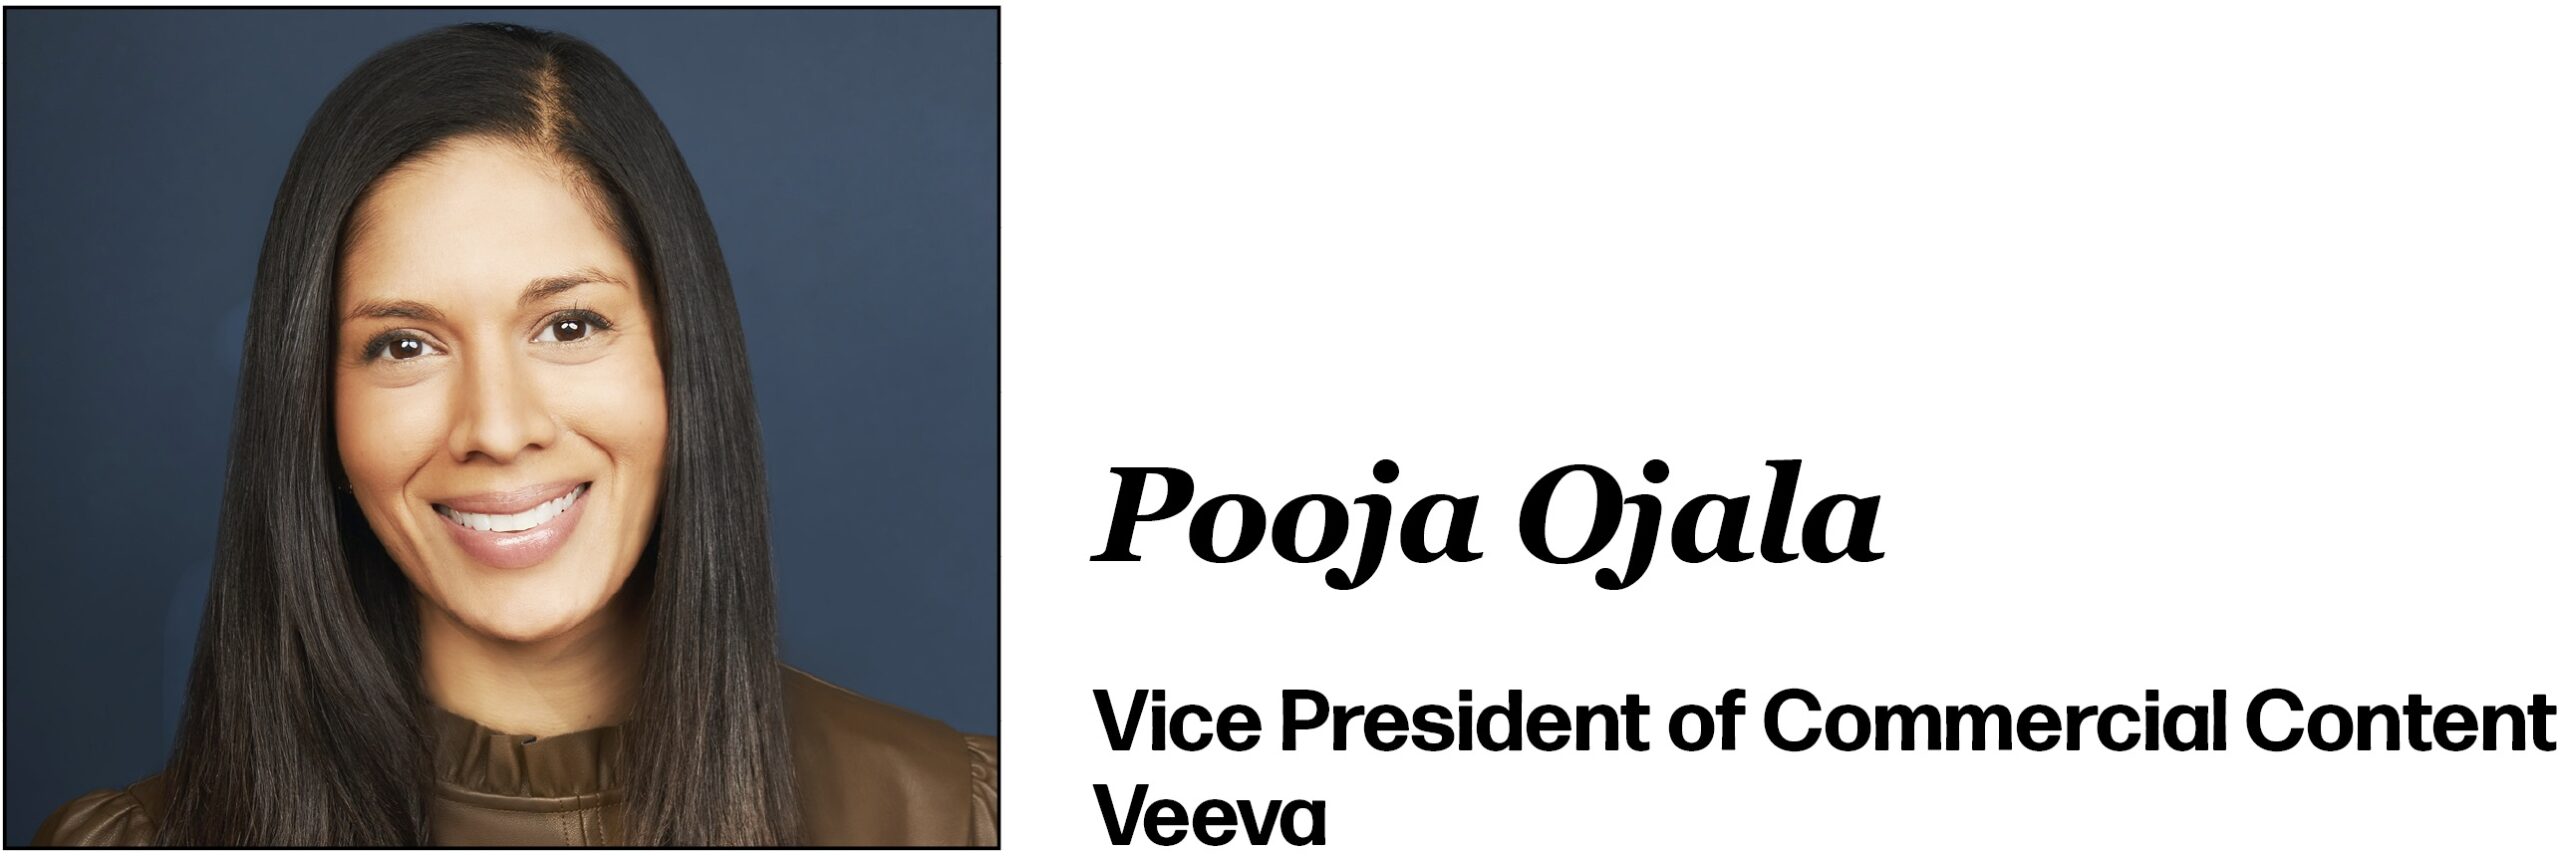 Pooja Ojala Vice President of Commercial Content Veeva